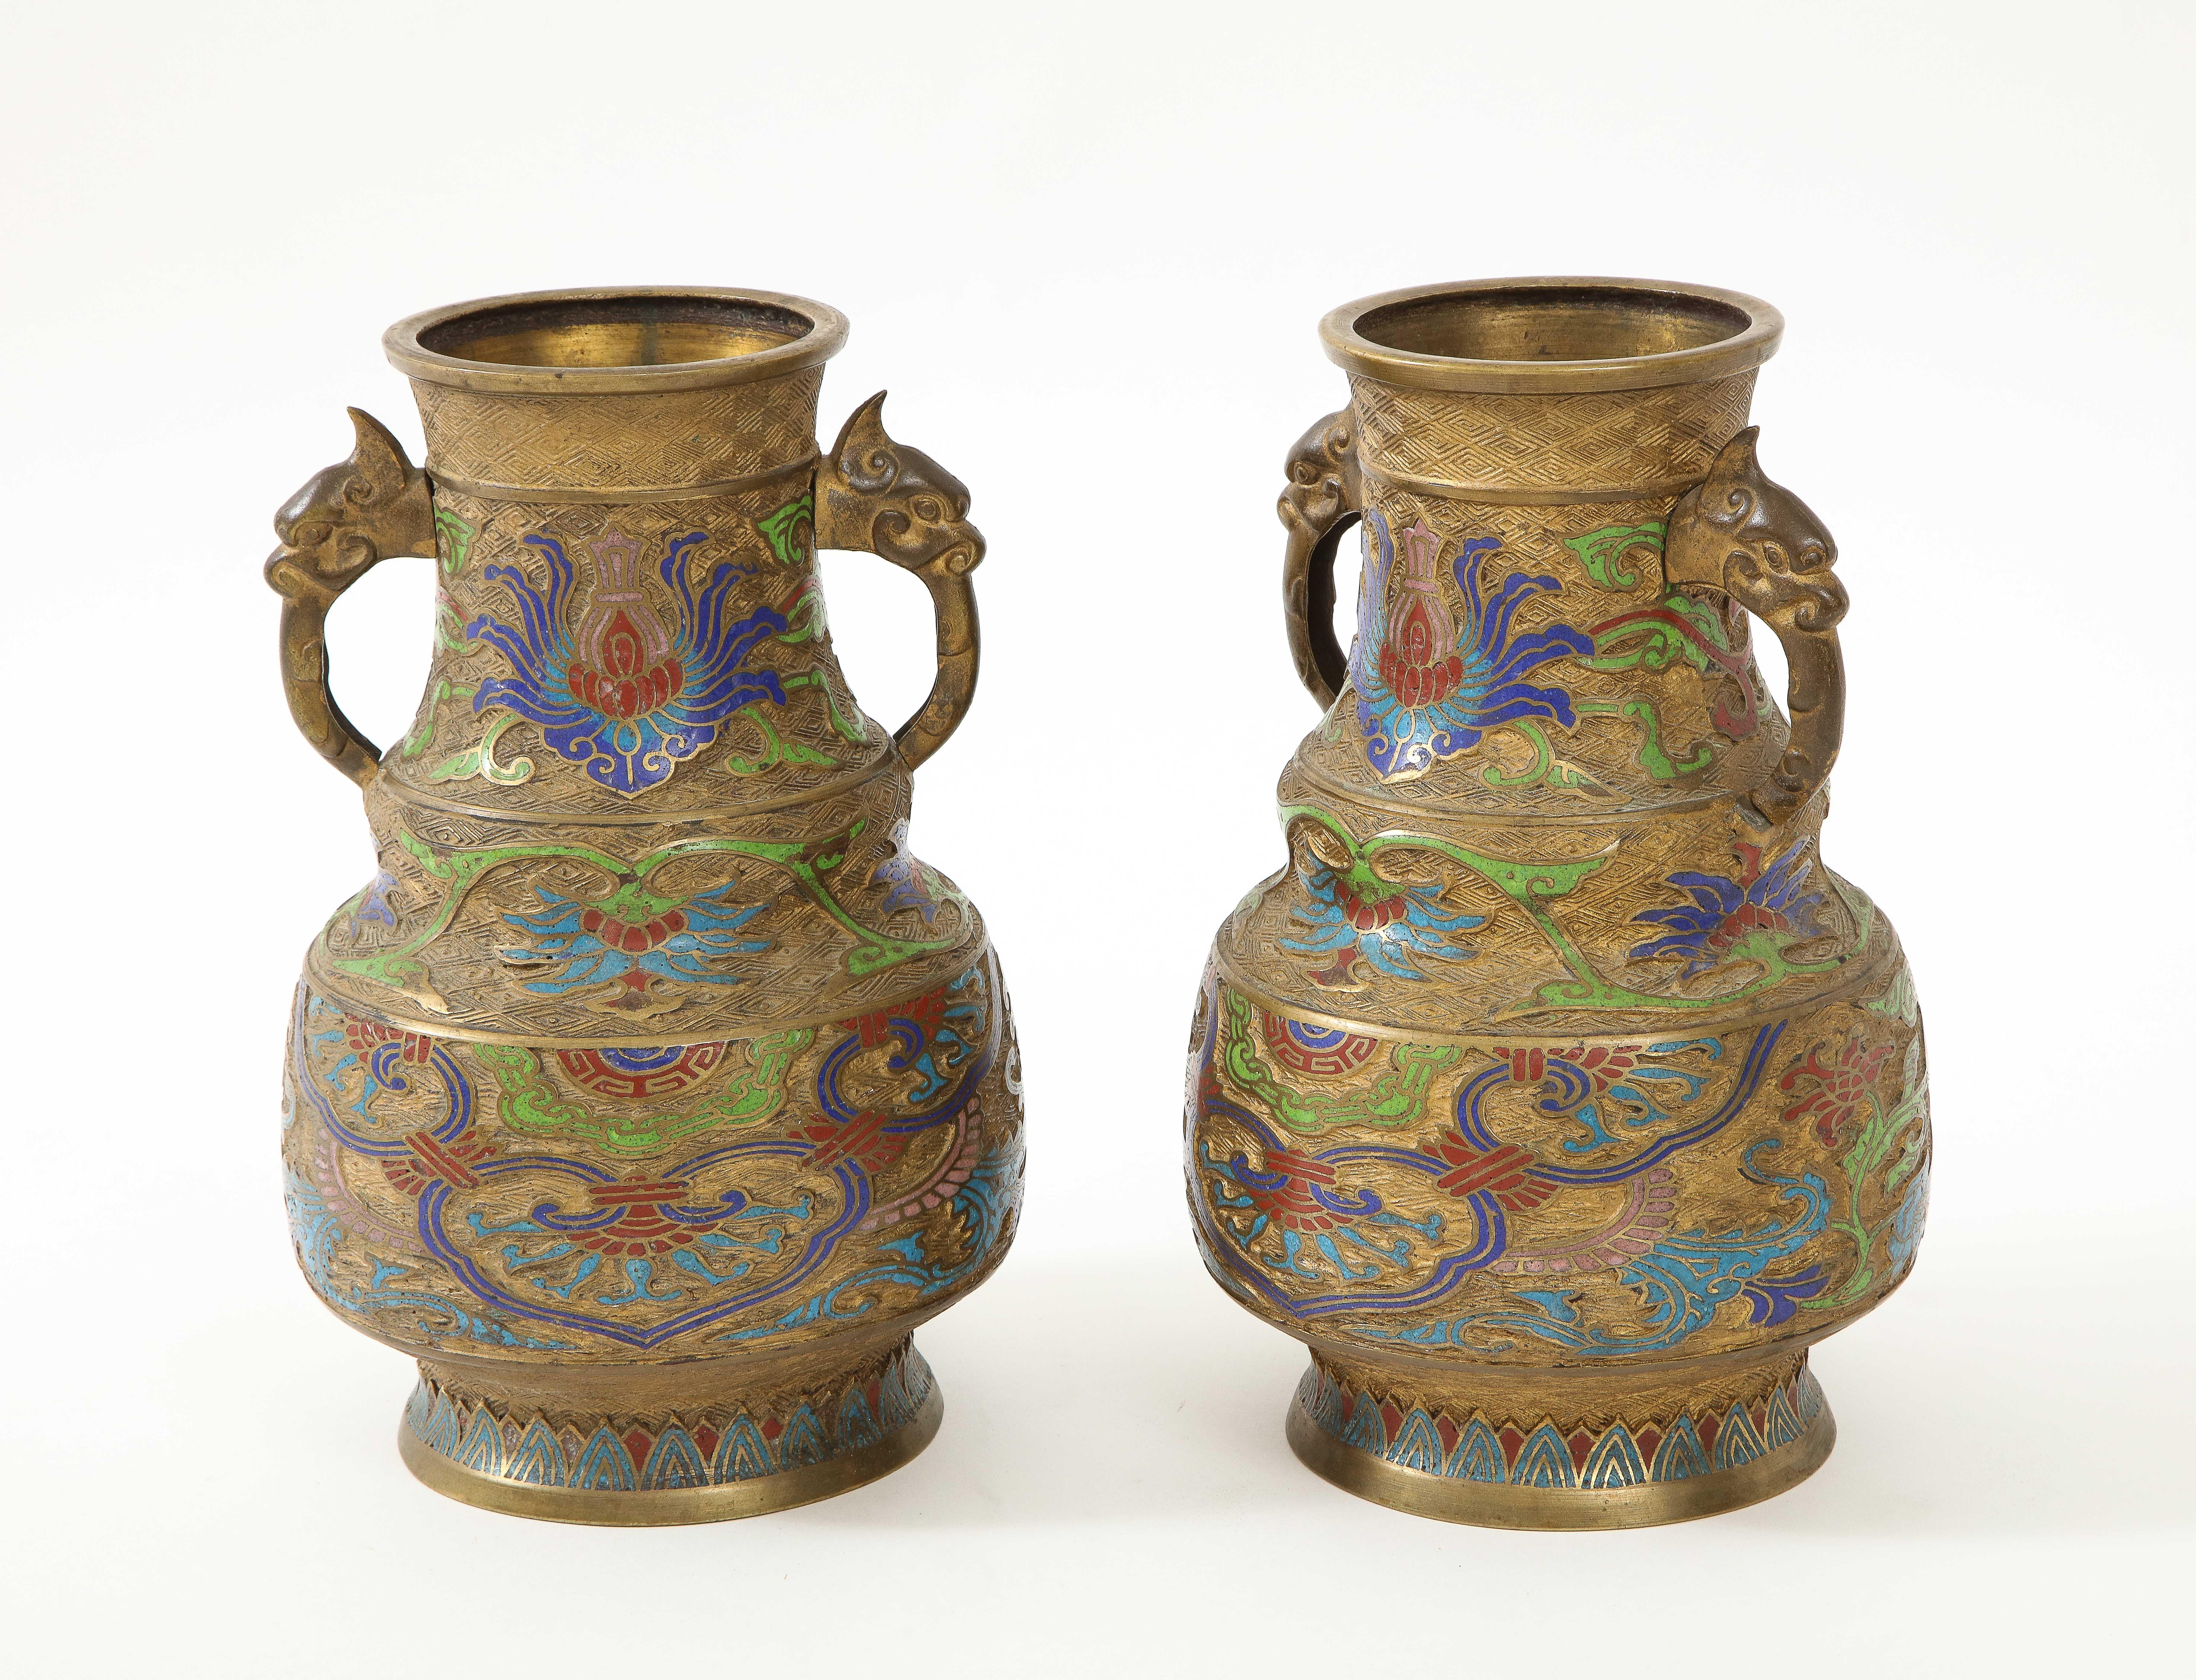 Pair of Chinese export late 19th century cloisonne vessels. Vessels feature hand chased glass stylized floral patterns in Victorian era colors of red/maroon, blues and green. Dragon Handles complete the exotic appeal.